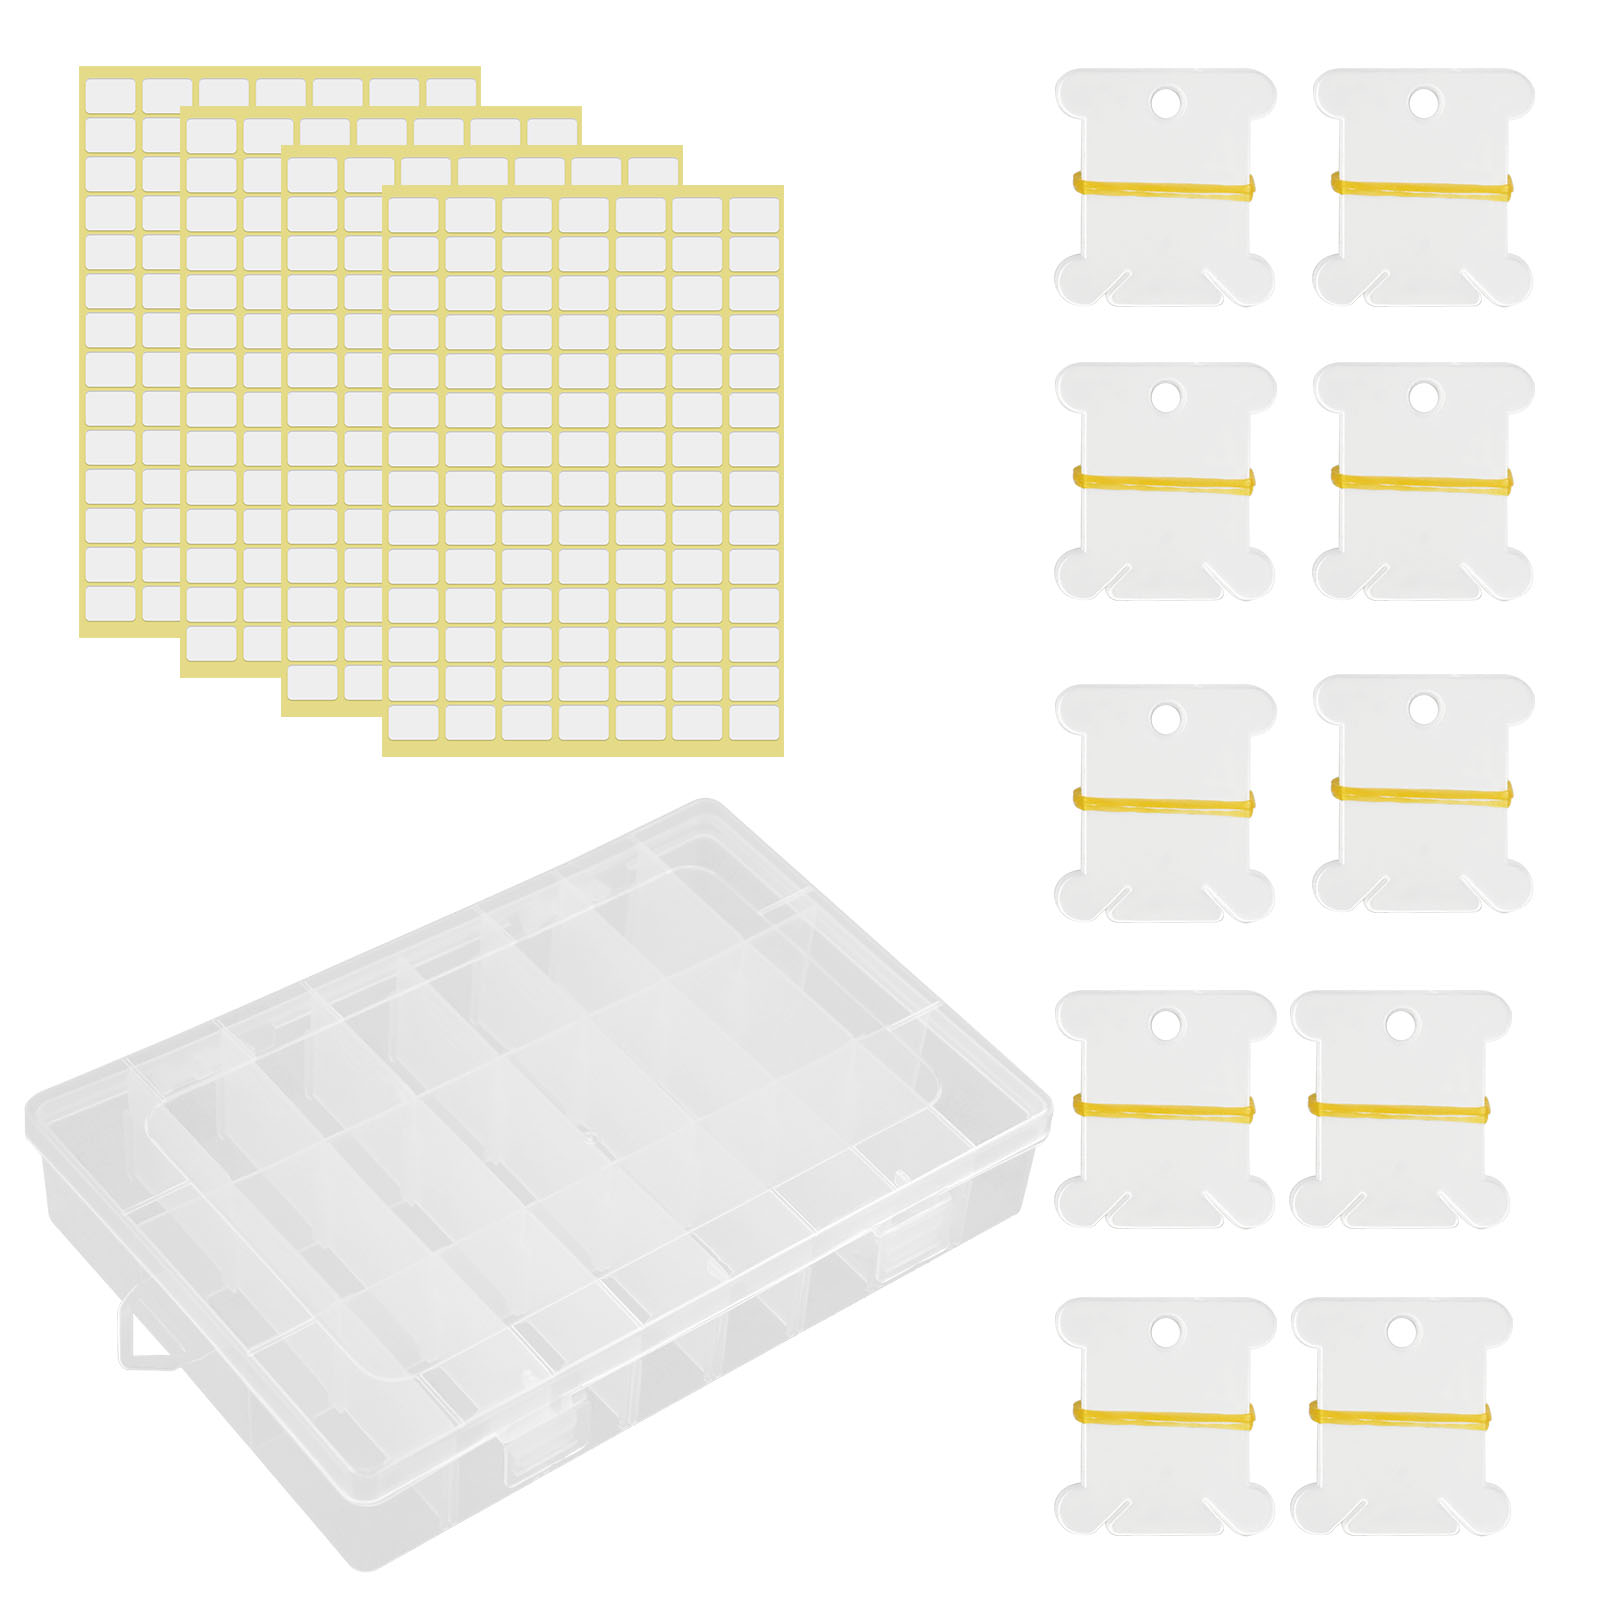 Embroidery Floss Organizer Box, 17 Compartment Plastic Box with Lid, Embroidery  Thread Organizer with 100 Cardboard Bobbins and 640 Floss Number Stickers, Cross  Stitch Supplies, Storage, and Thread